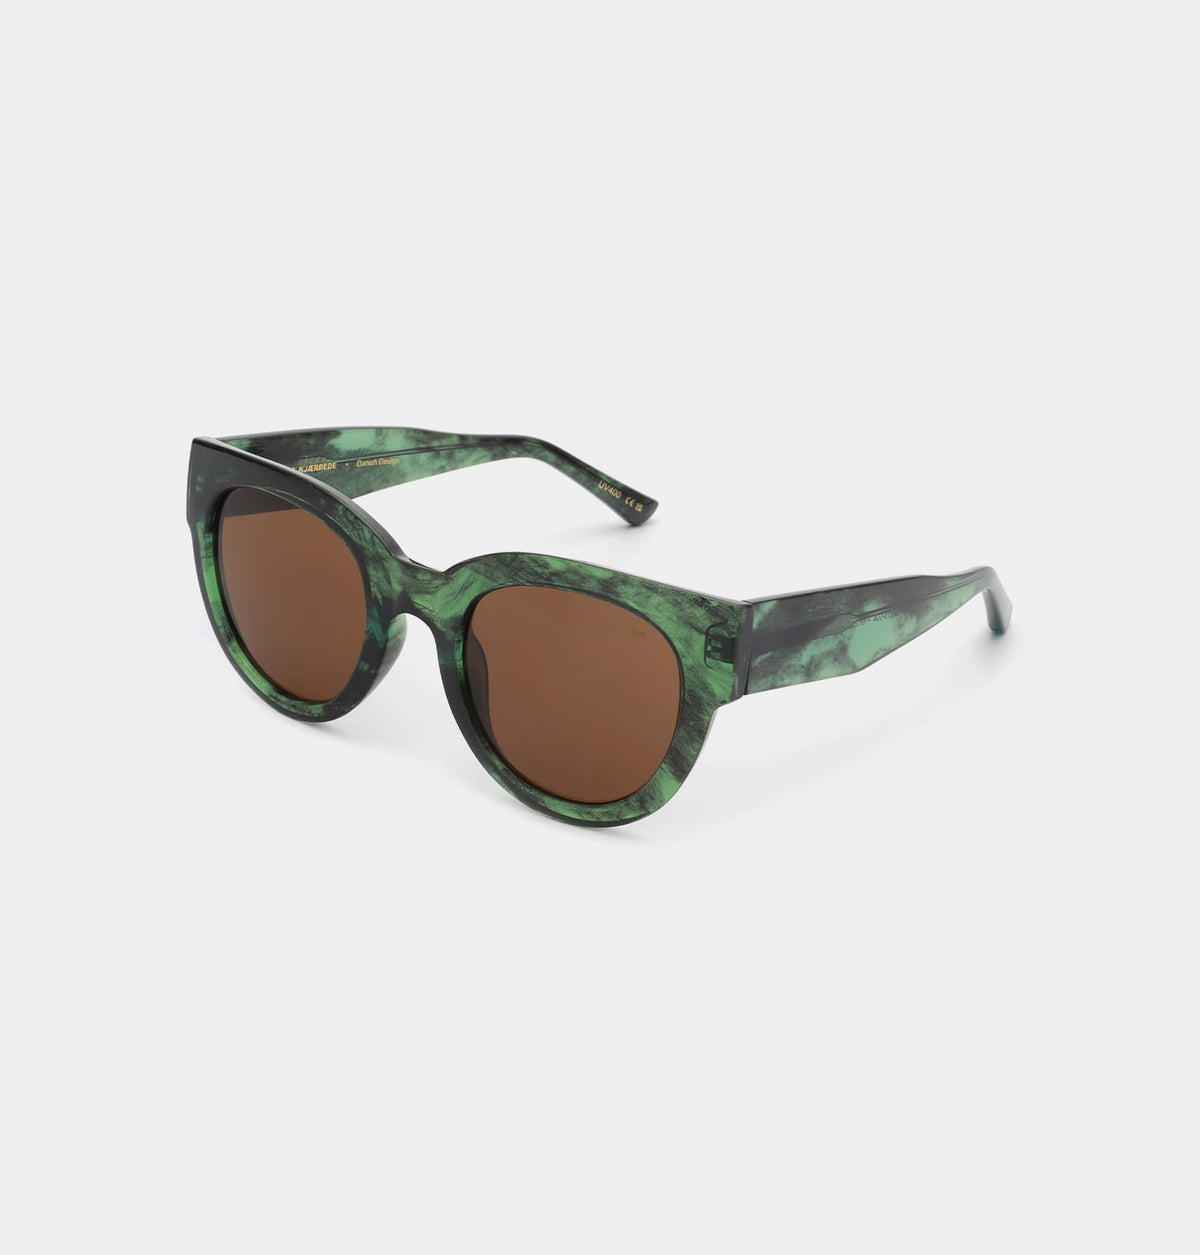 A. KJAERBEDE SUNGLASSES - LILLY - GREEN MARBLE TRANSPARENT